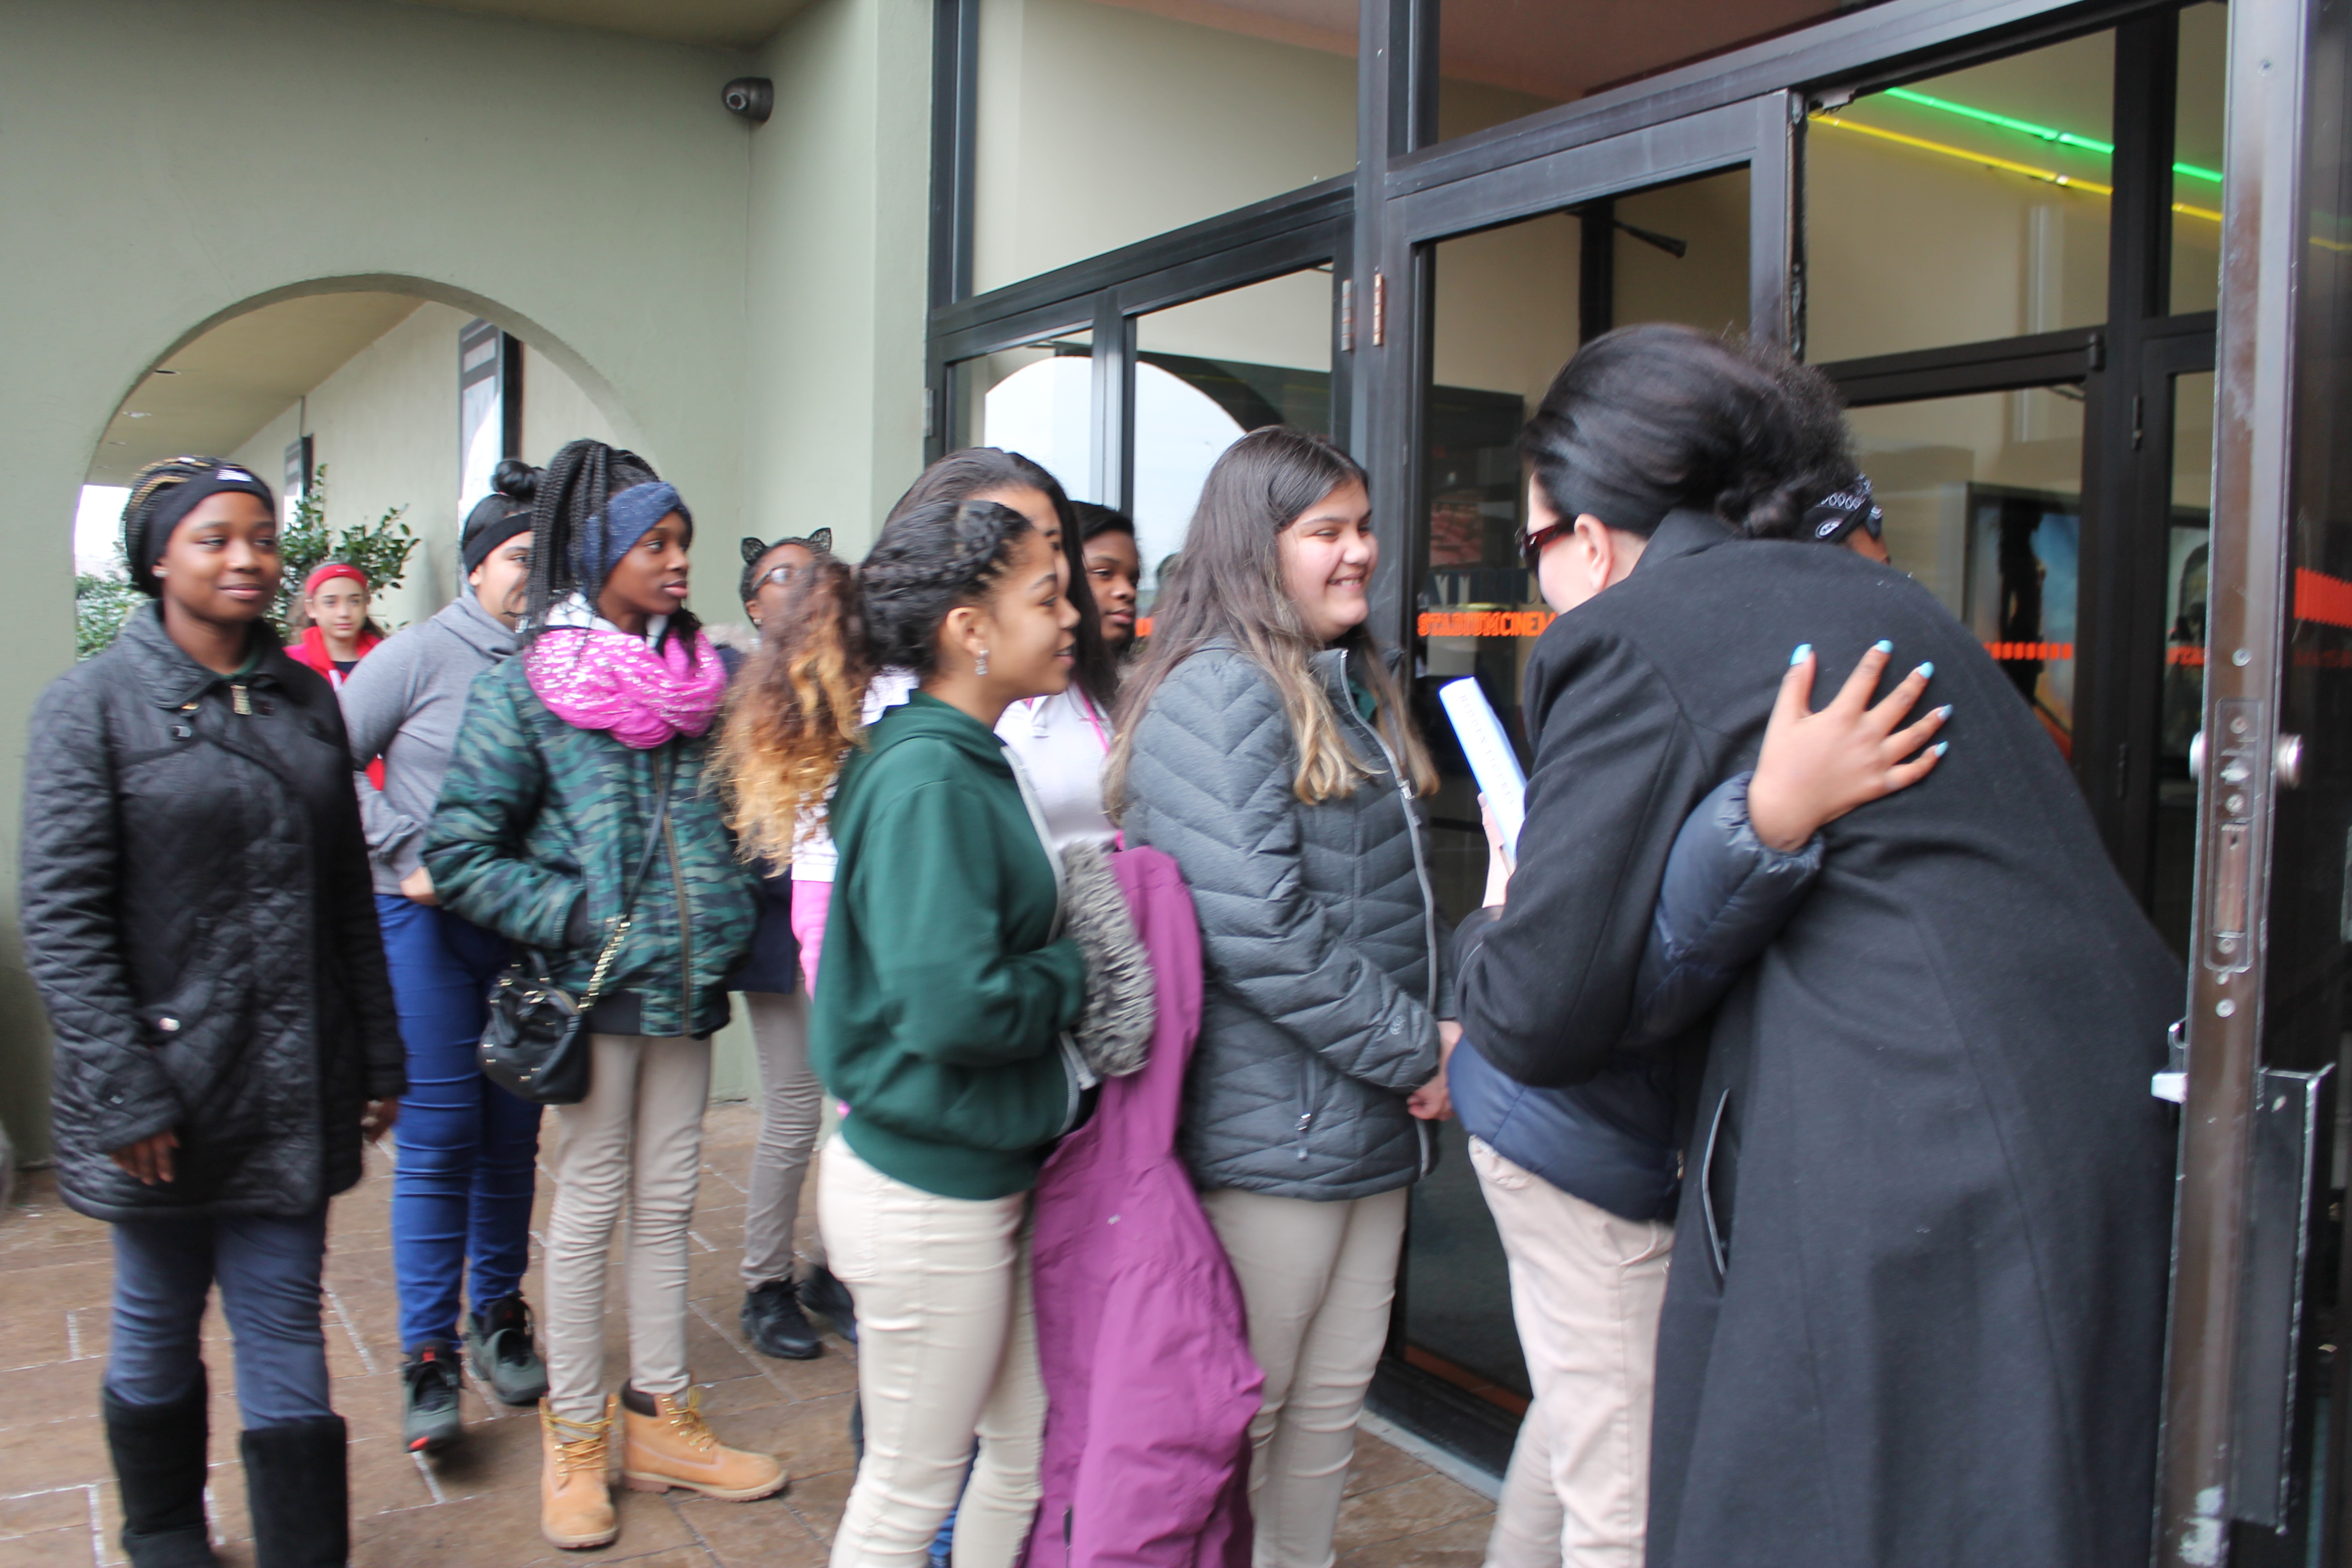 Kristine Garlisi greets each student before they enter the theater.